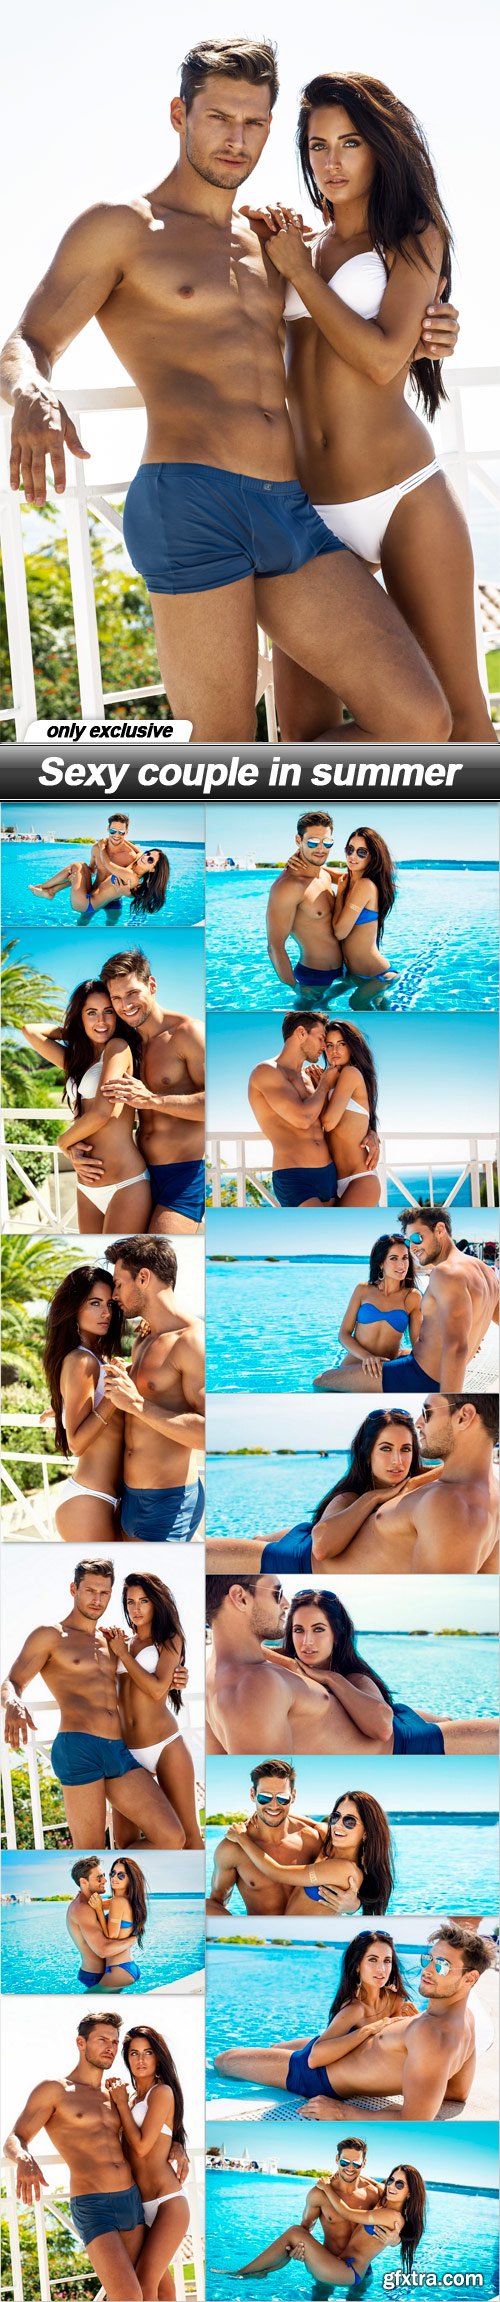 Sexy couple in summer - 14 UHQ JPEG